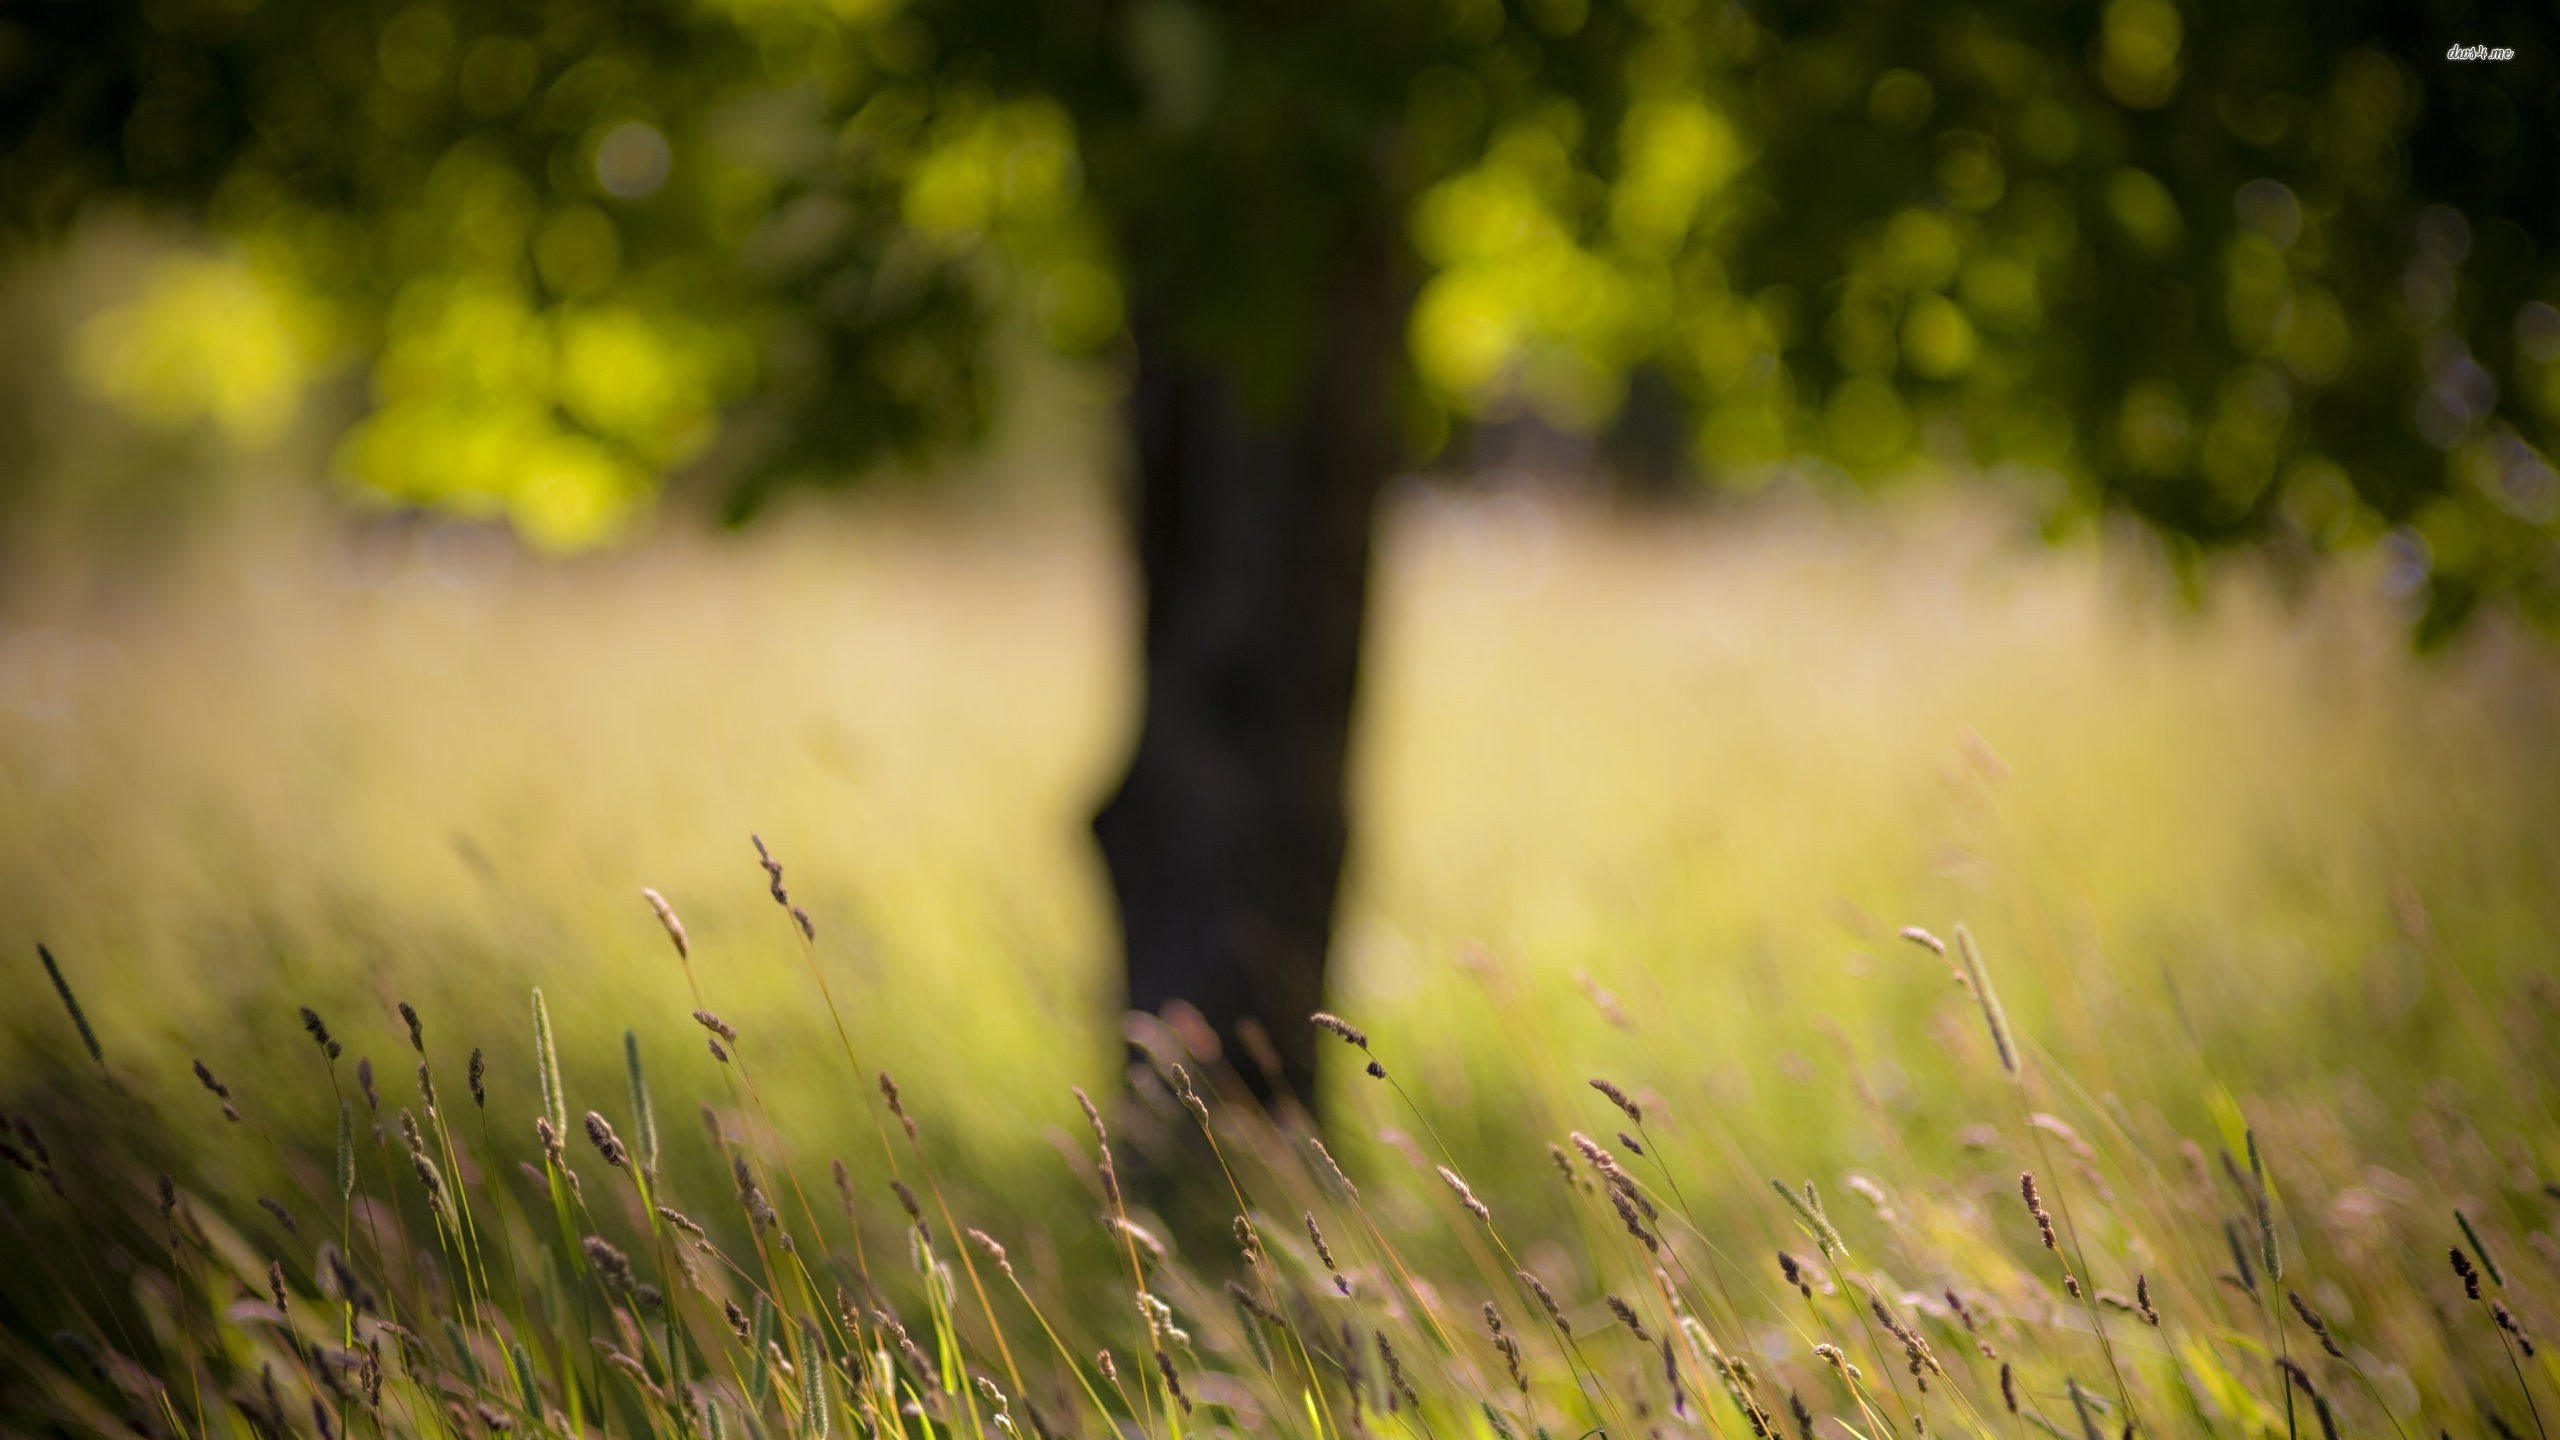 Grass with tree in the background wallpaper - Photography